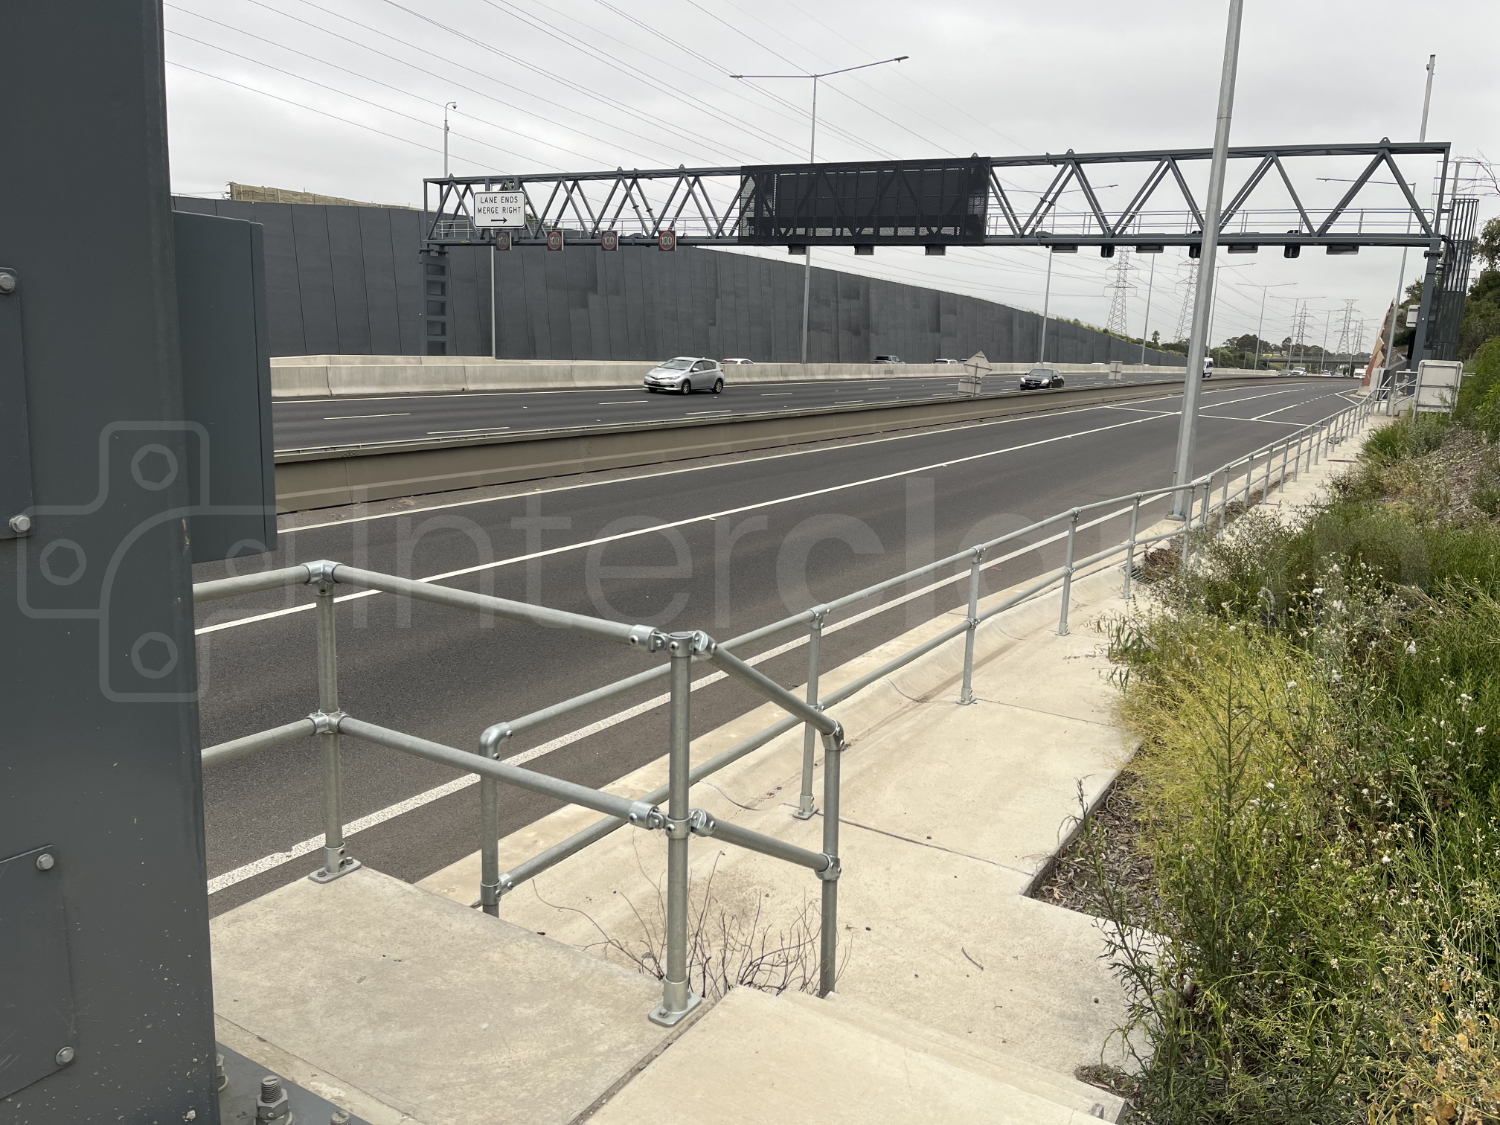 Interclamp galvanised key clamp handrail, installed next to a highway